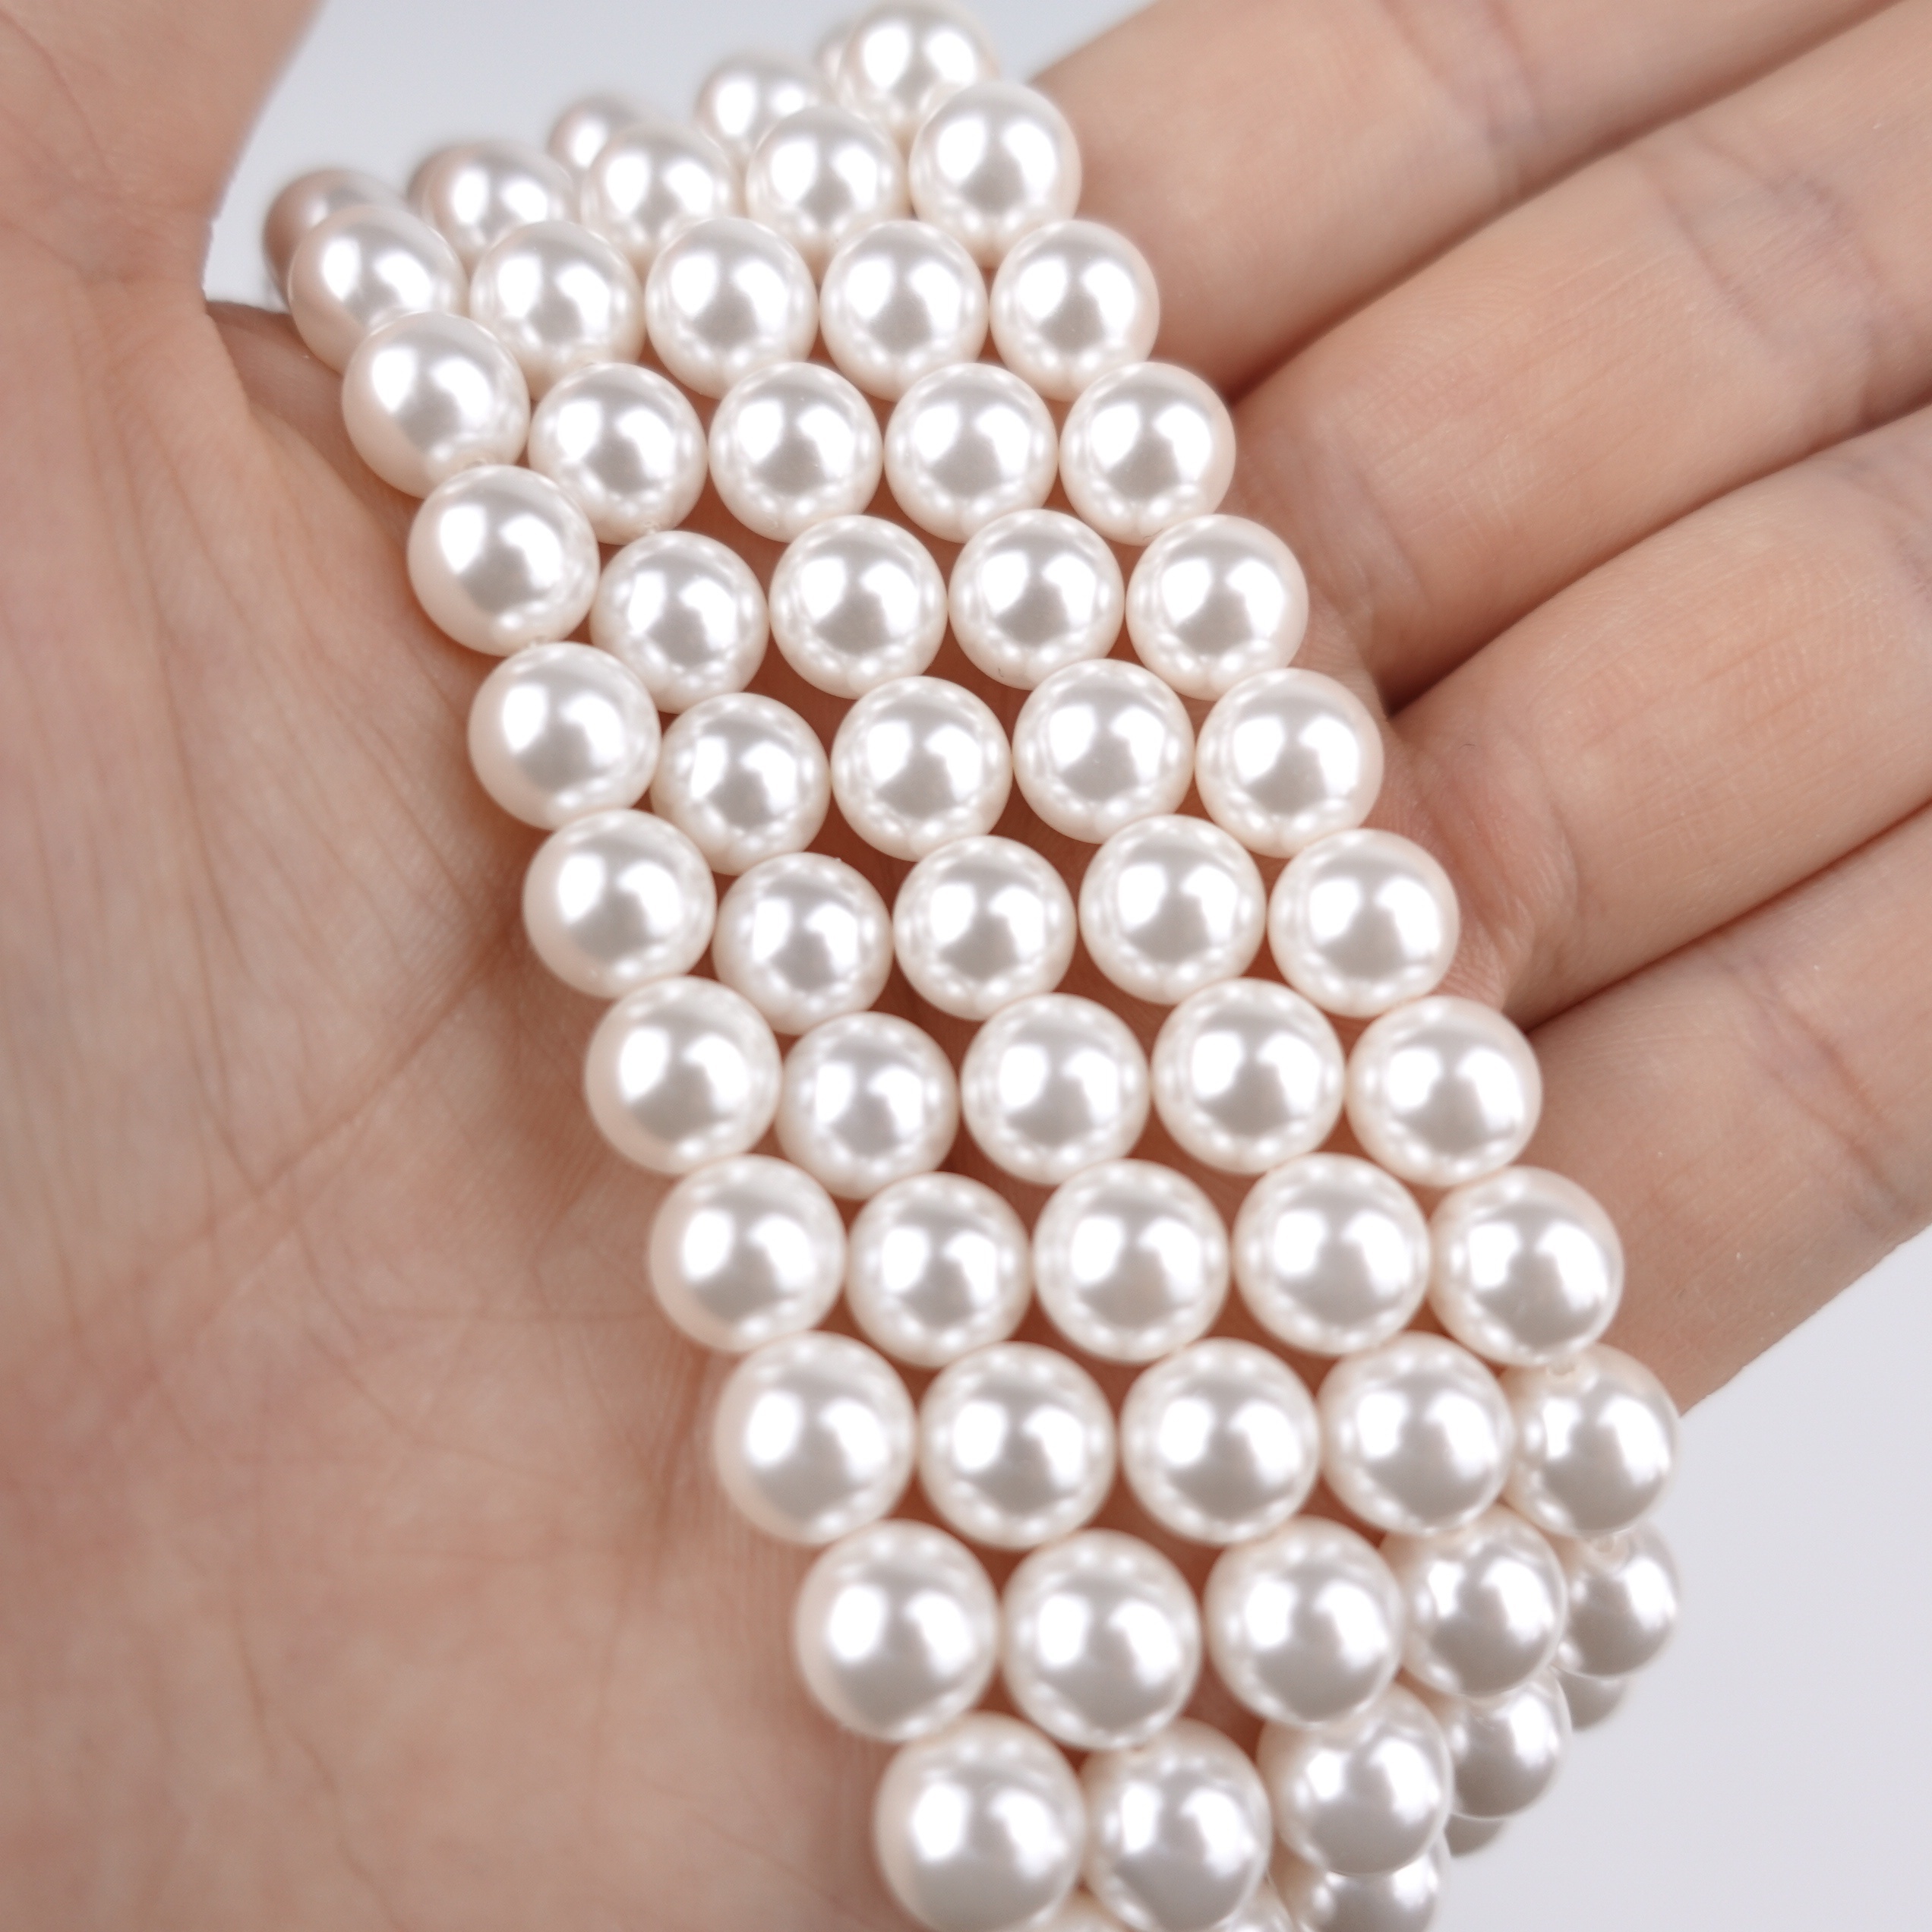 AceFun Pearl Beads for Jewelry Making 200pcs 14mm Pearl Craft Beads with  Hole Loose Fake Pearls Small Faux Pearls for Jewelry Making Bracelet  Necklace